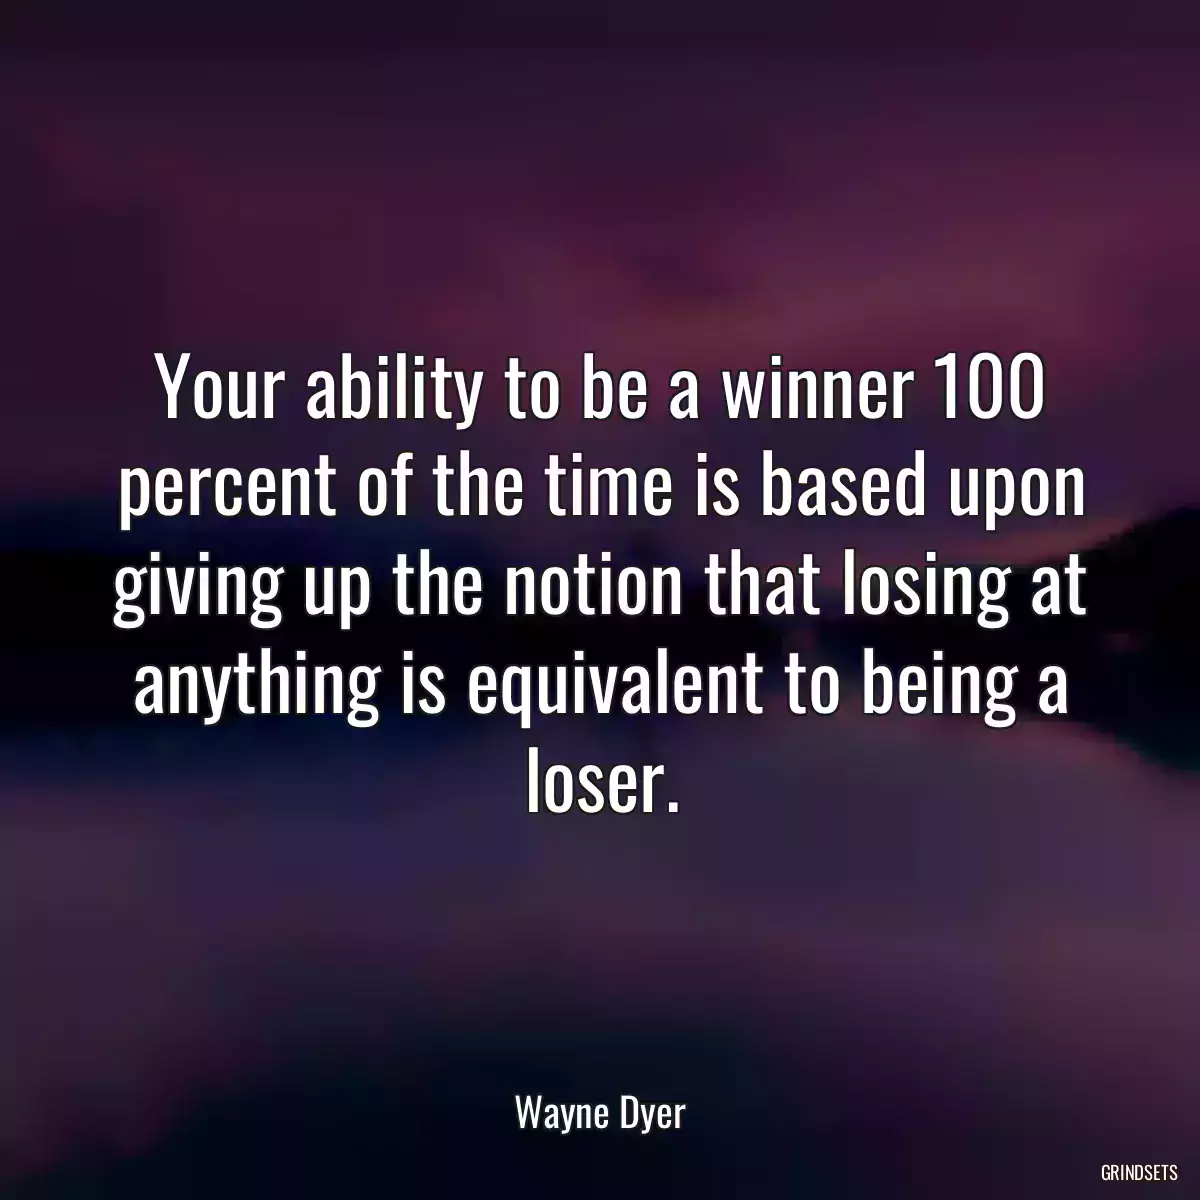 Your ability to be a winner 100 percent of the time is based upon giving up the notion that losing at anything is equivalent to being a loser.